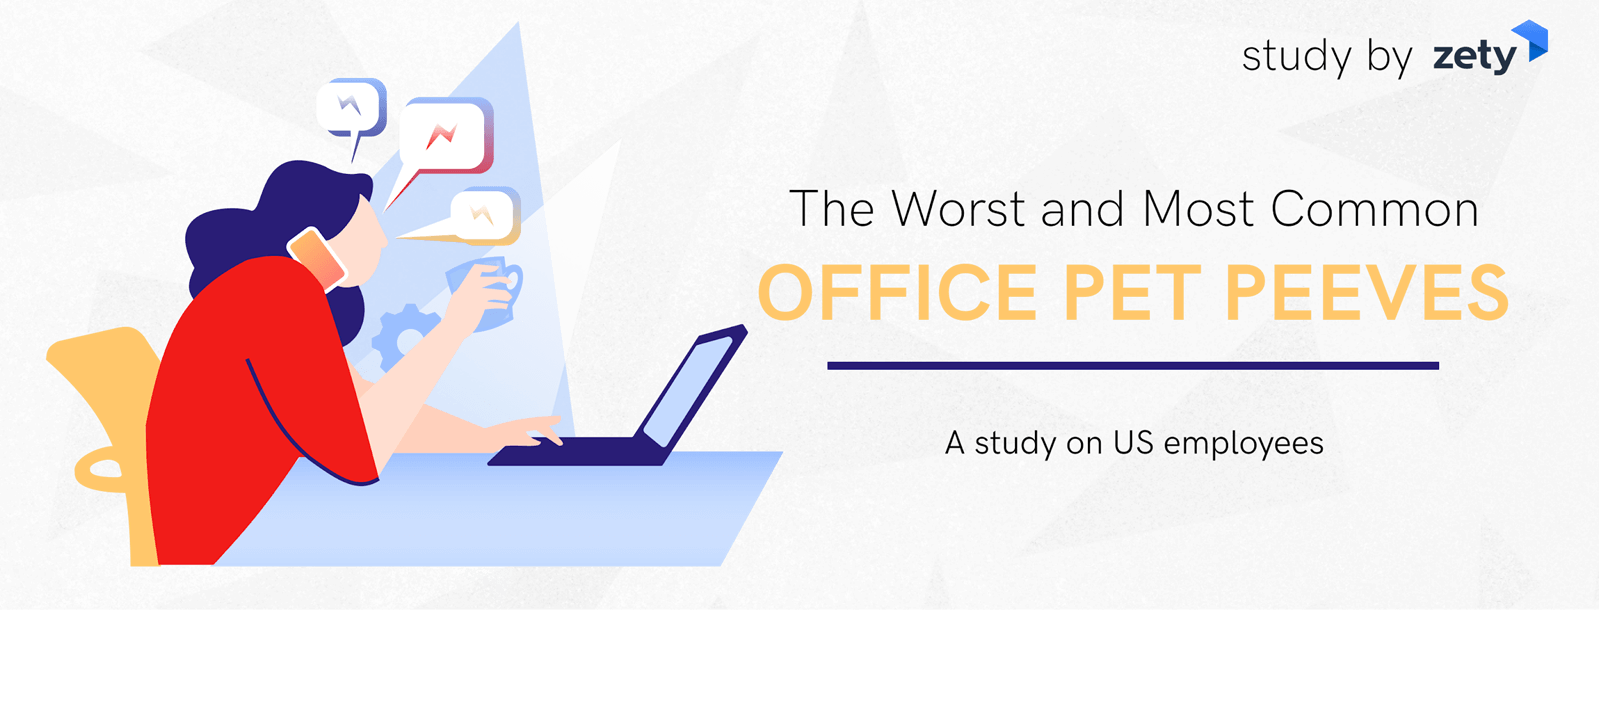 the worst office offenders